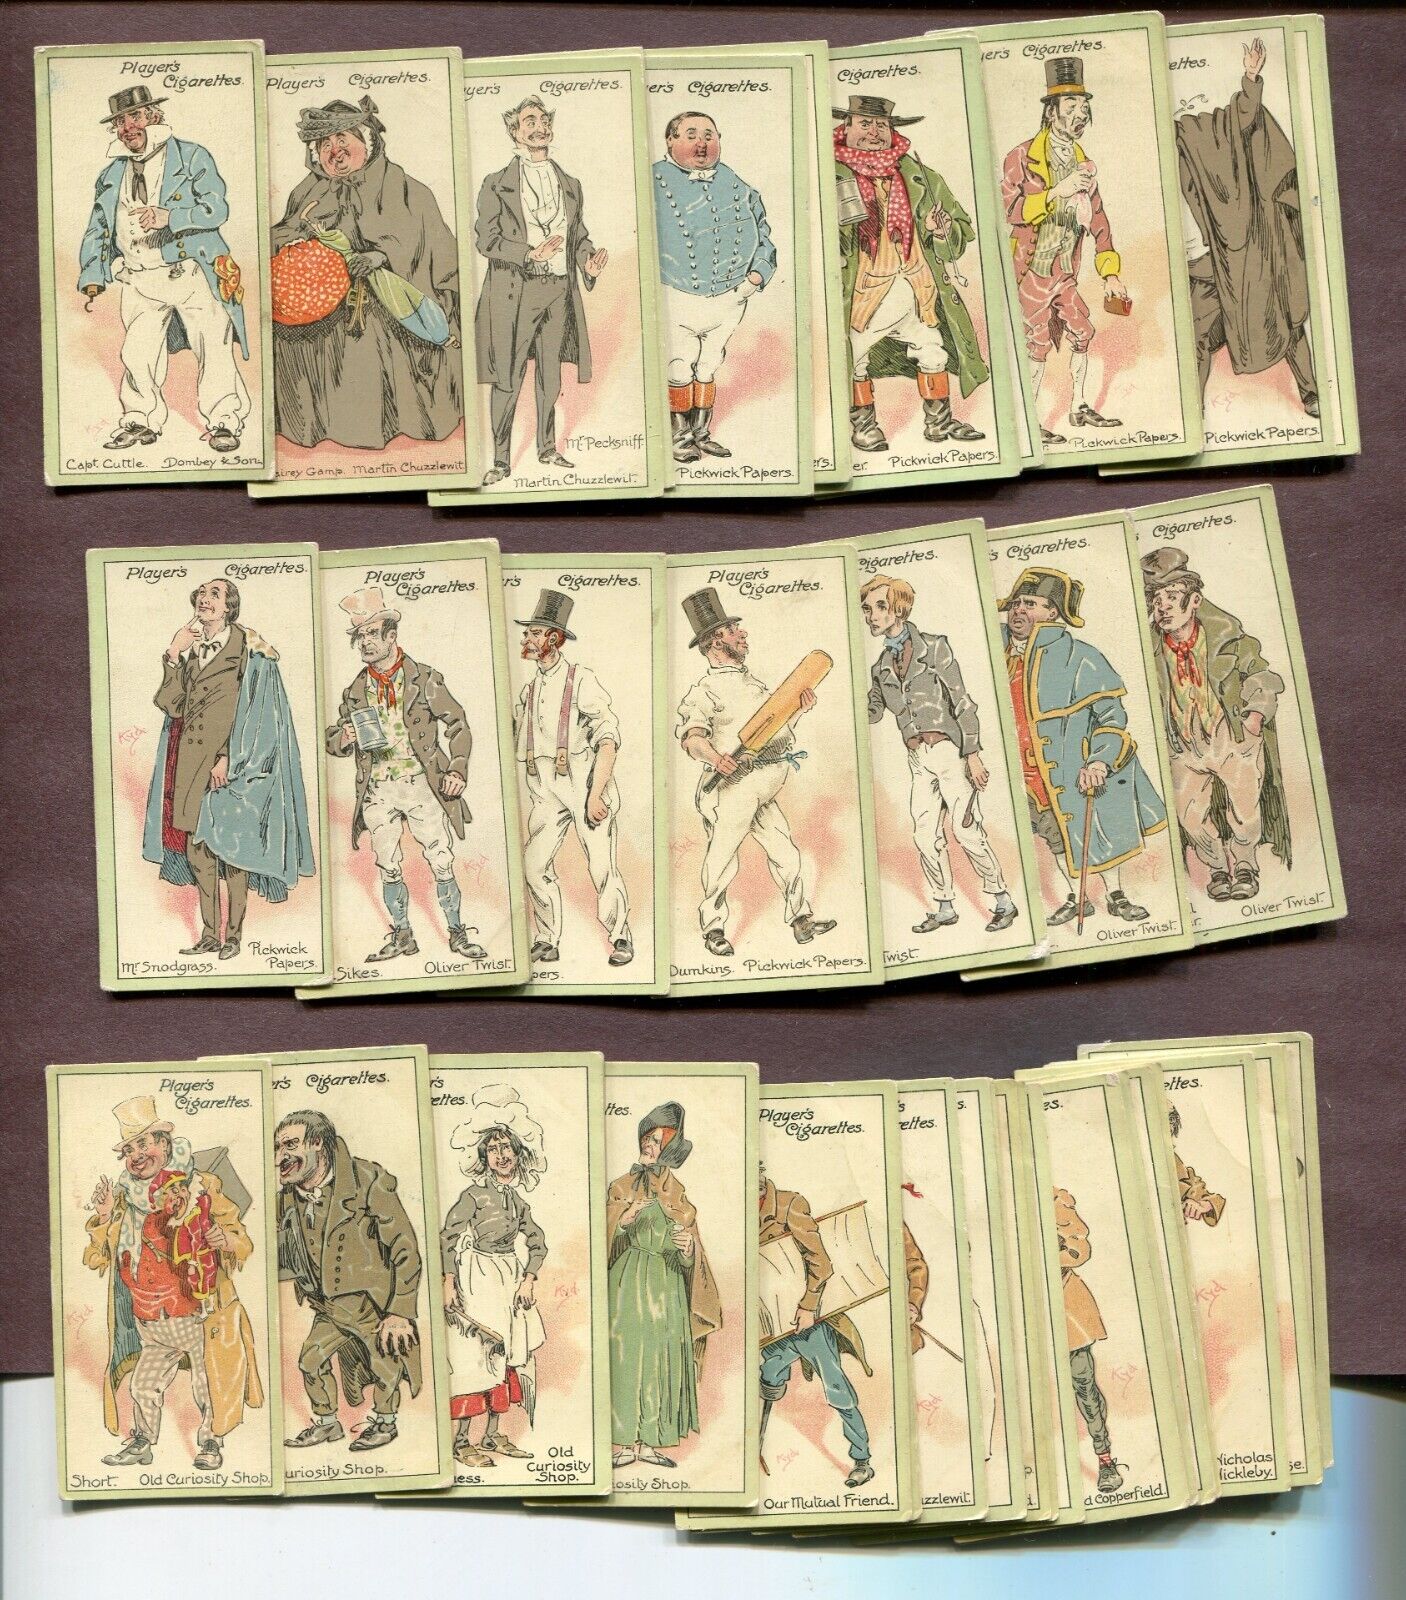 1912 JOHN PLAYER CIGARETTES SERIES 1 & 2 CHARACTERS FROM DICKENS 50 CARD SET